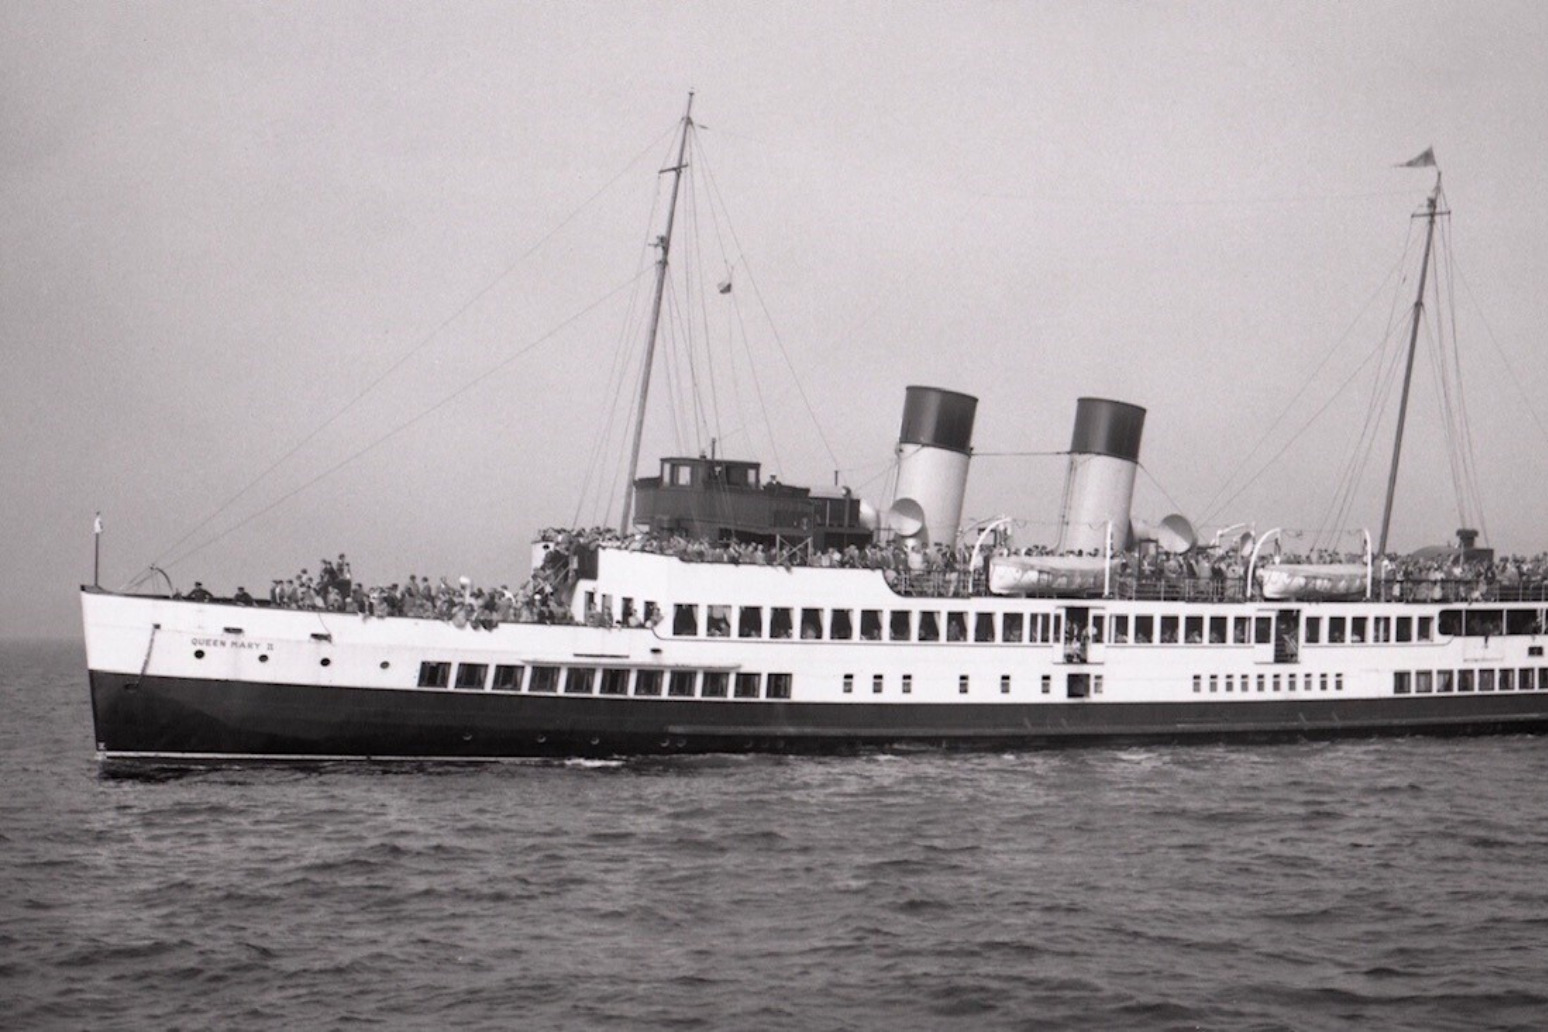 Clyde steamer which carried royalty to sail again